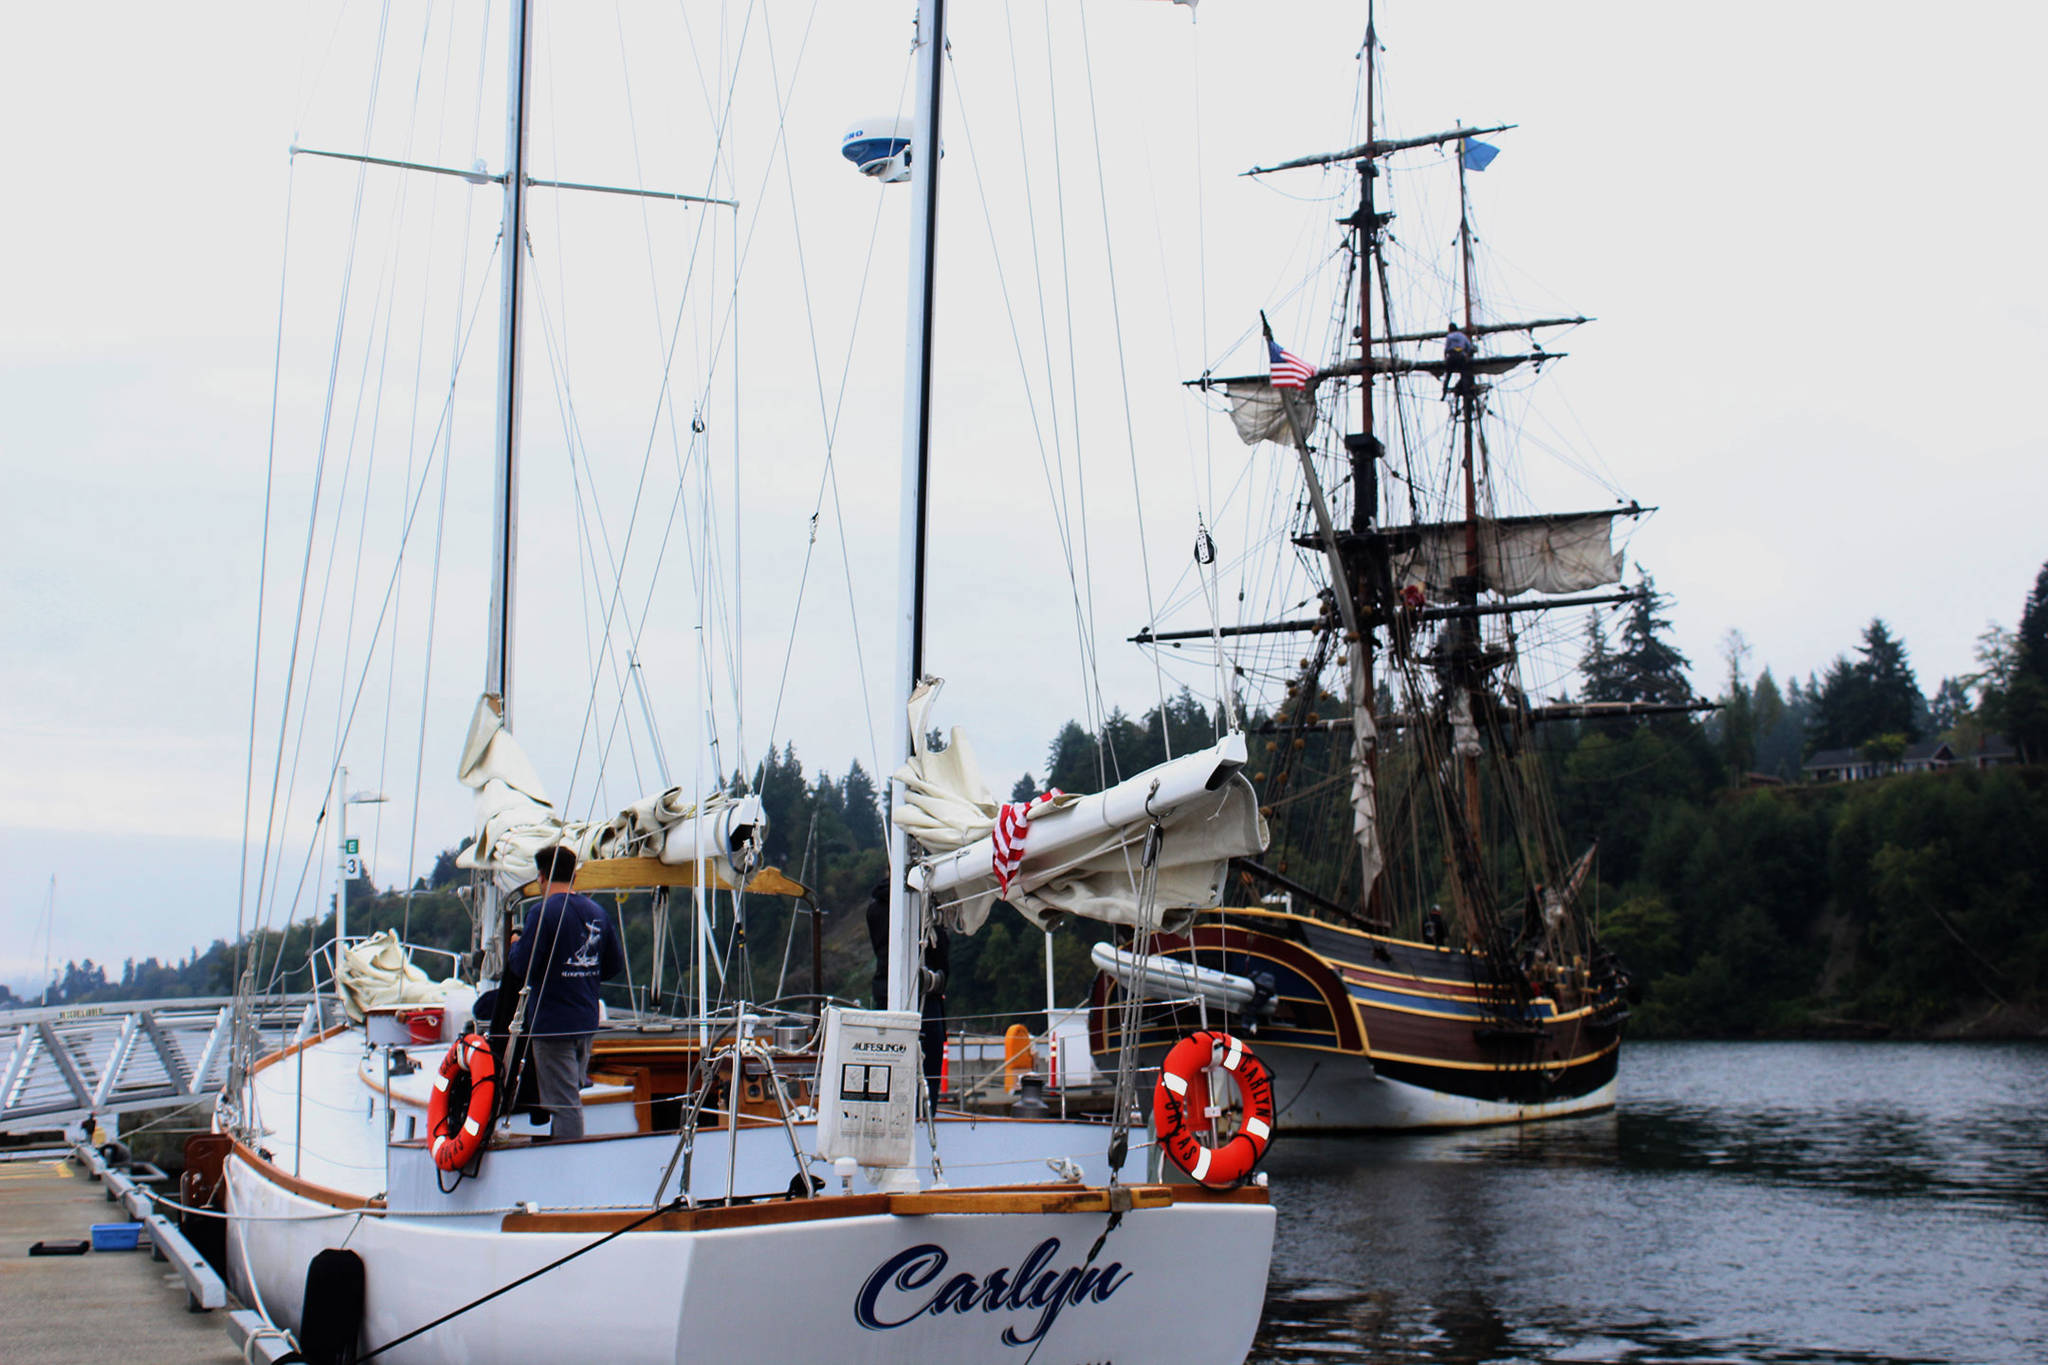 The Carlyn scientific research vessel and Lady Washington historic “tall ship” await students from South Whidbey Elementary school at Langley harbor. Photo by Wendy Leigh/South Whidbey Record.